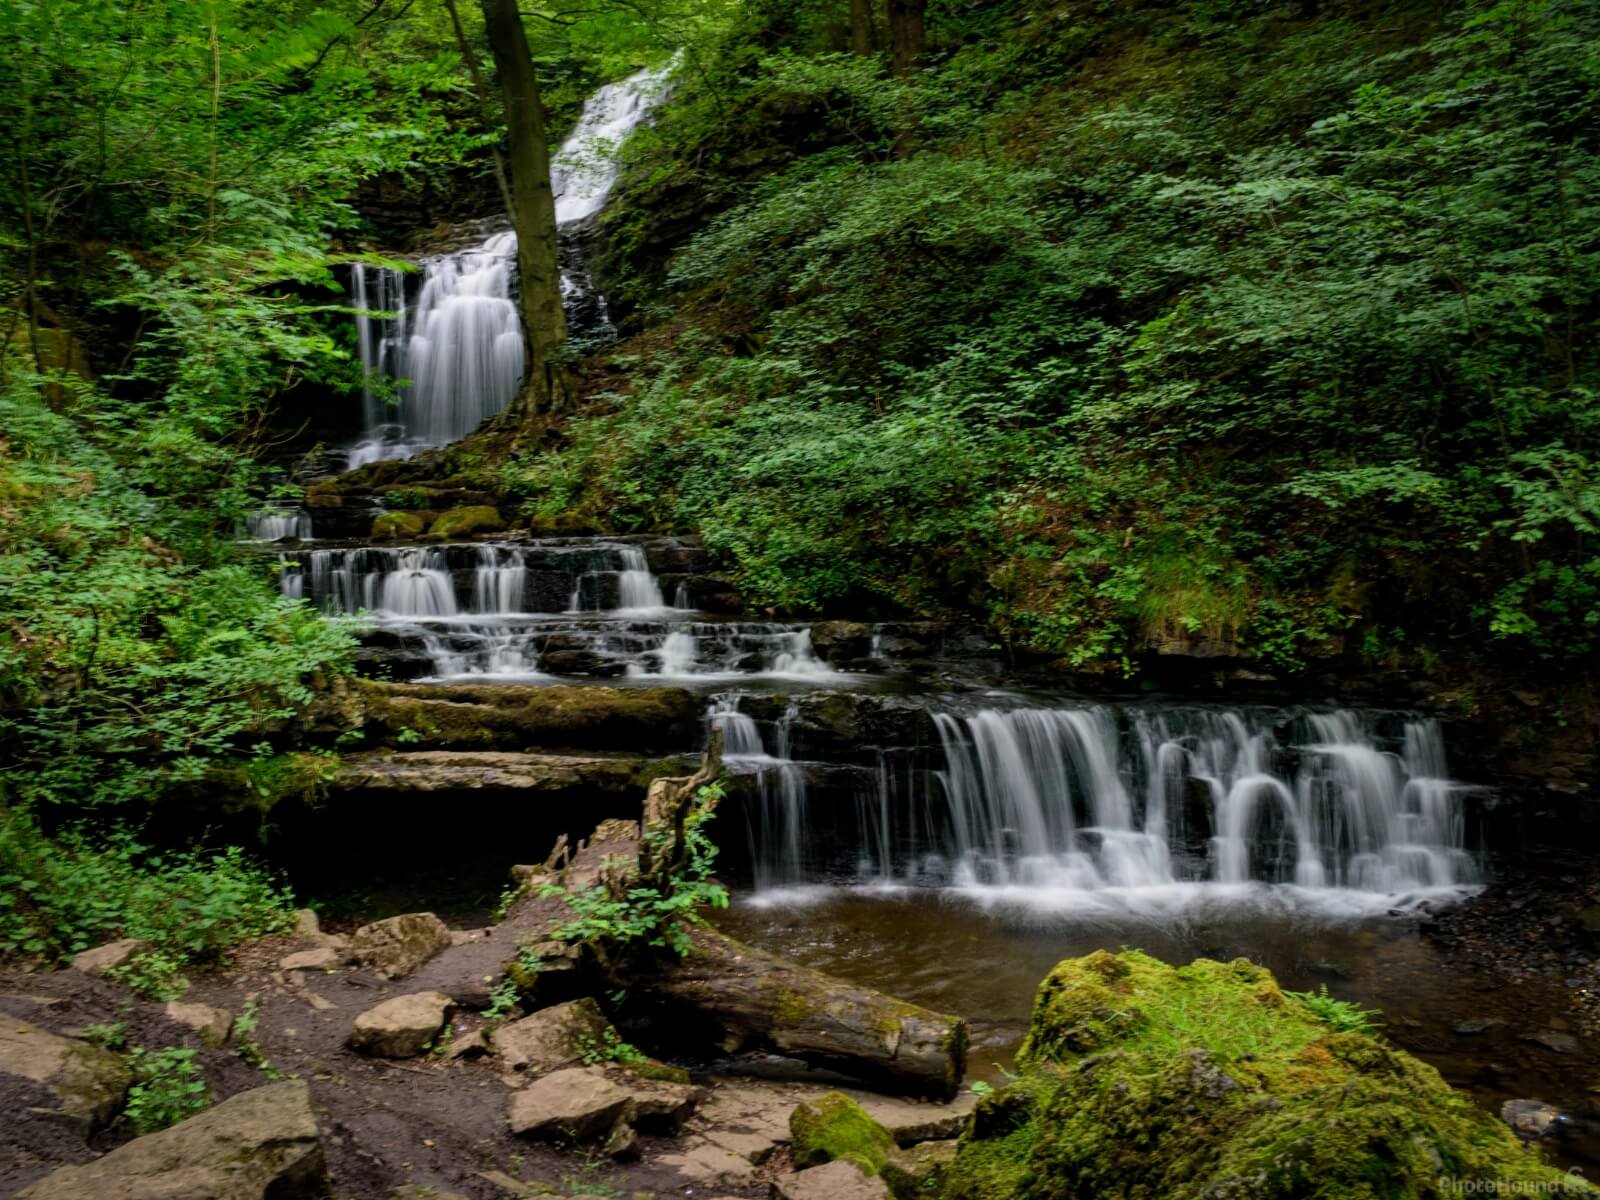 Image of Scaleber Force by Stuart Leach